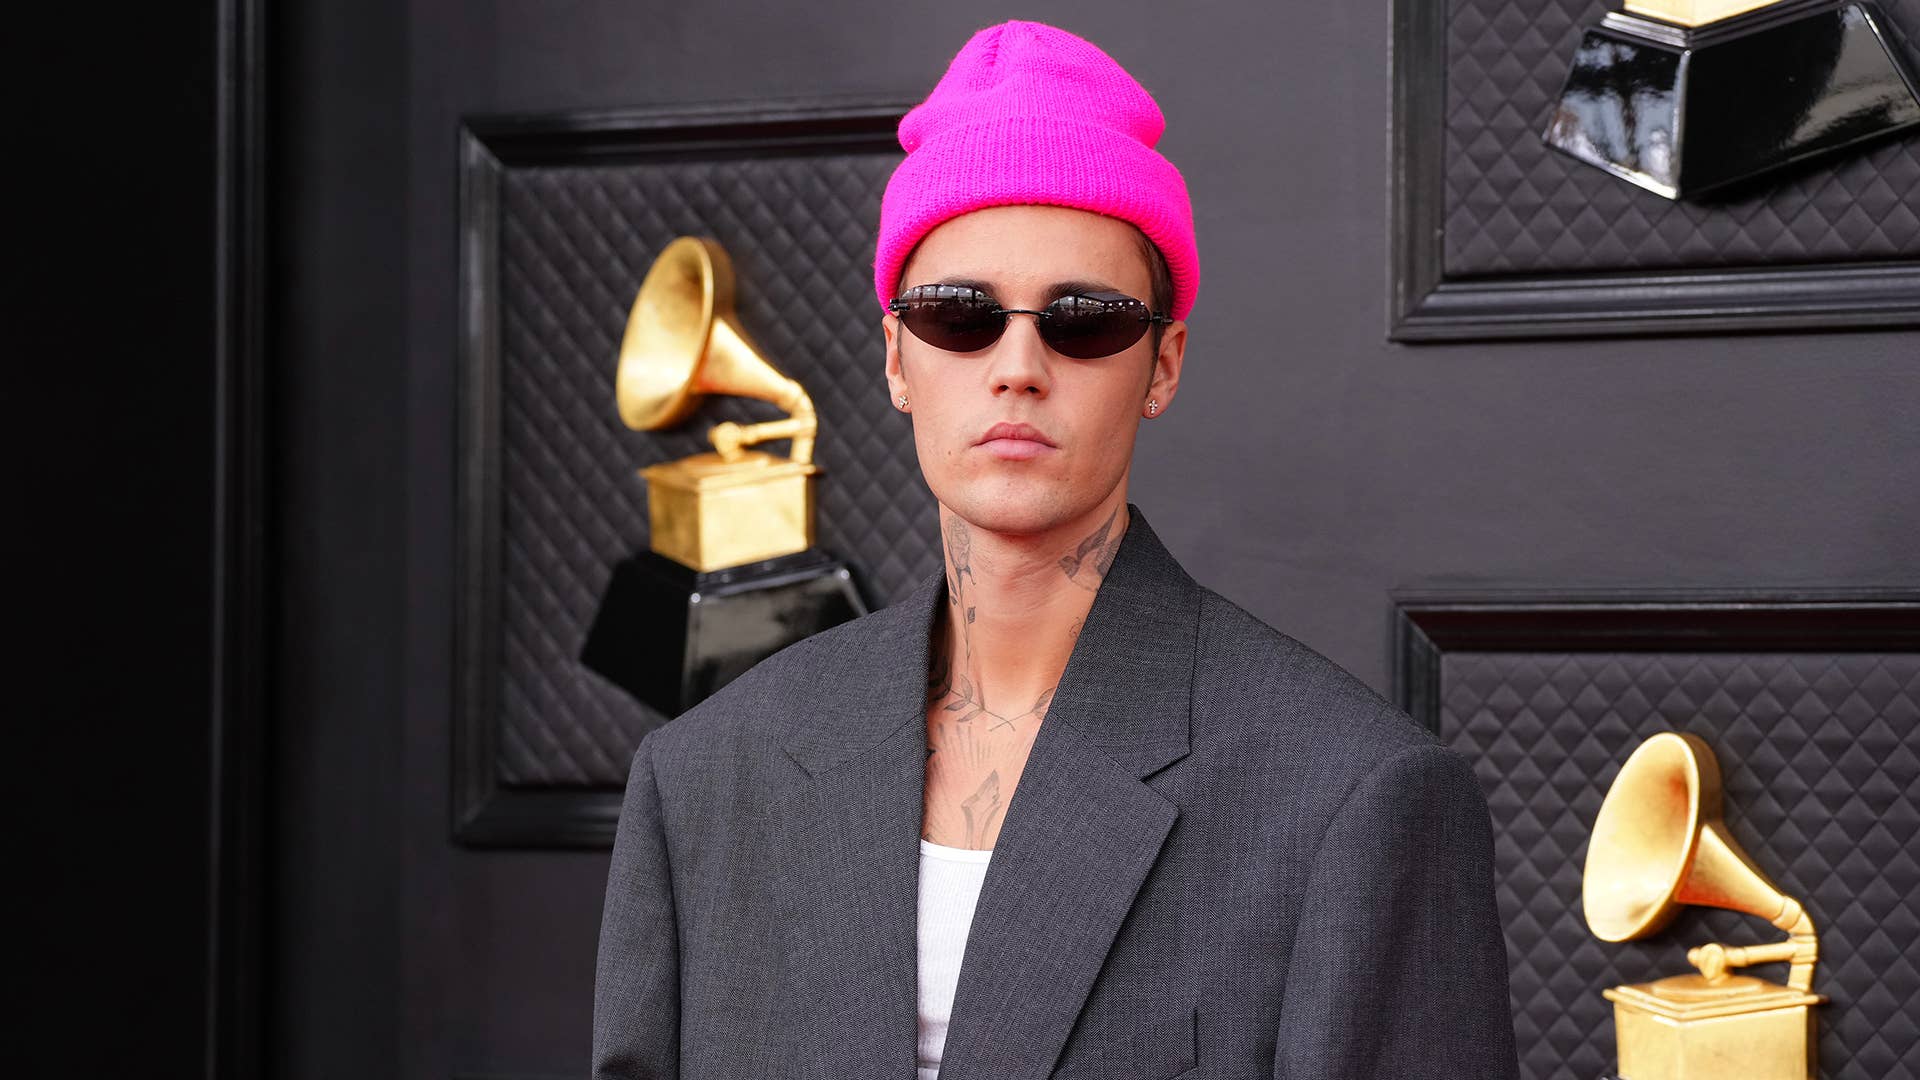 Justin Bieber attends the 64th Annual GRAMMY Awards at MGM Grand Garden Arena